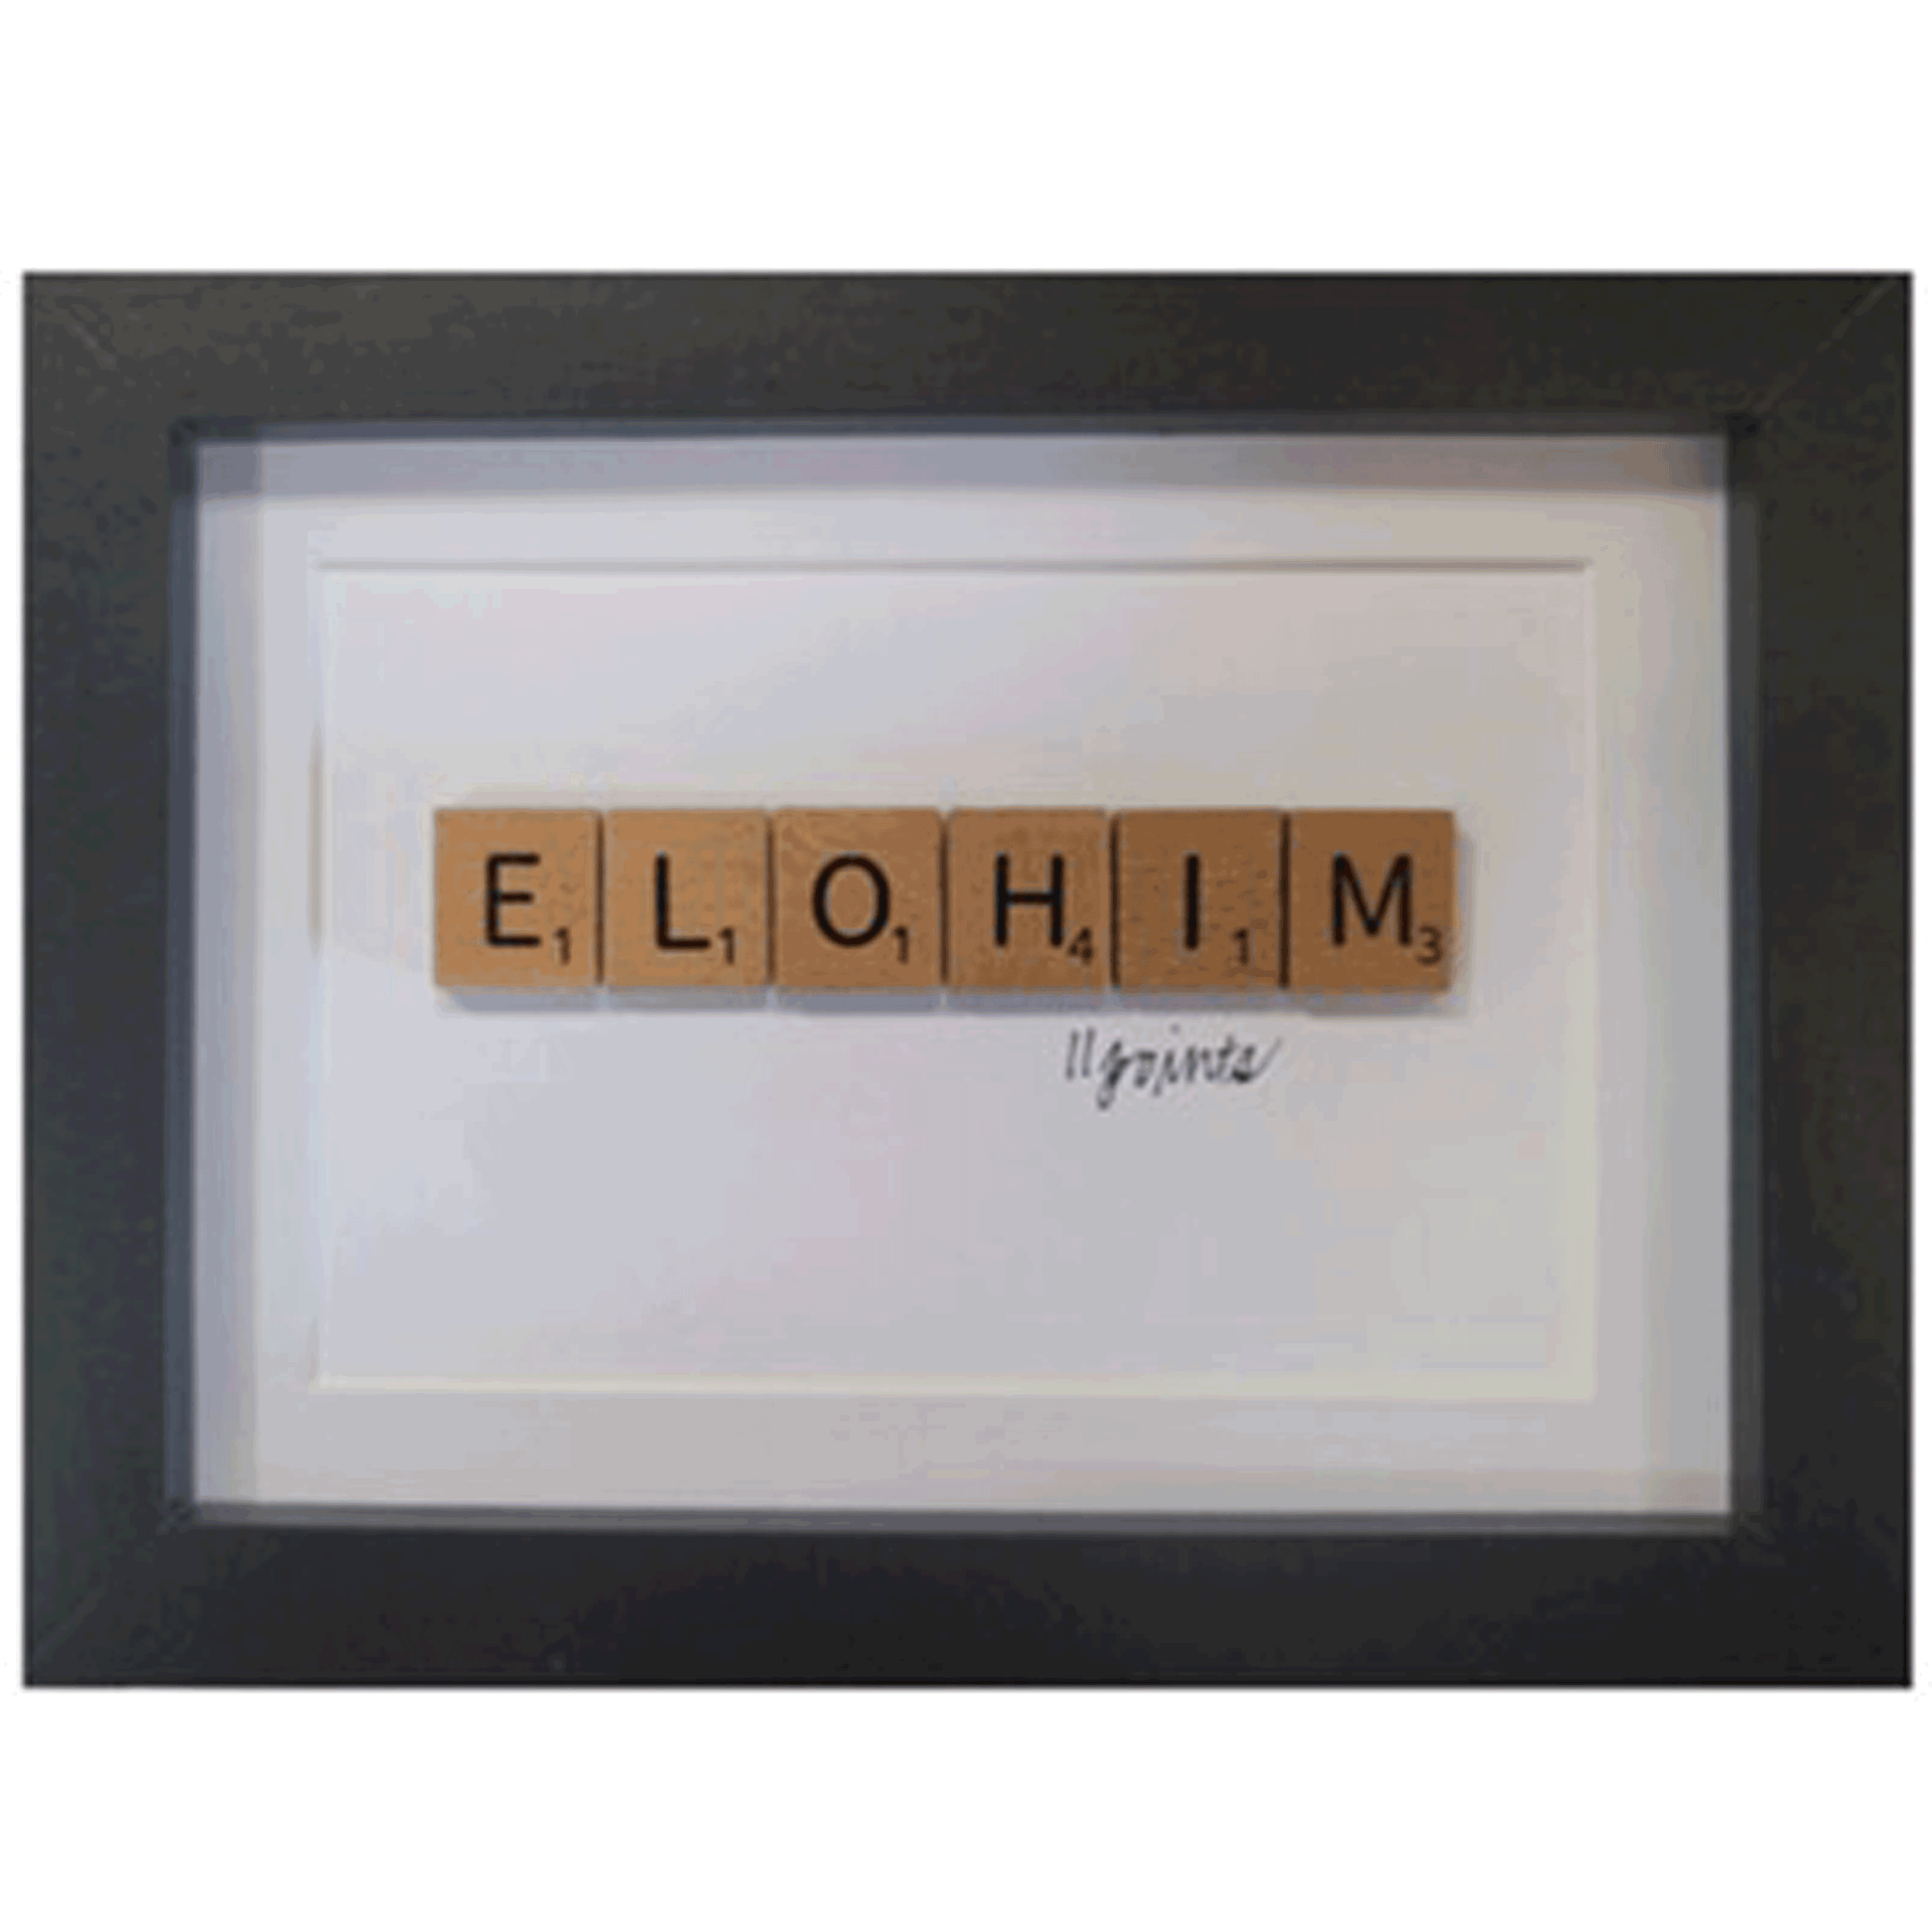 Elohim spelled out in scrabble letters with black frame 